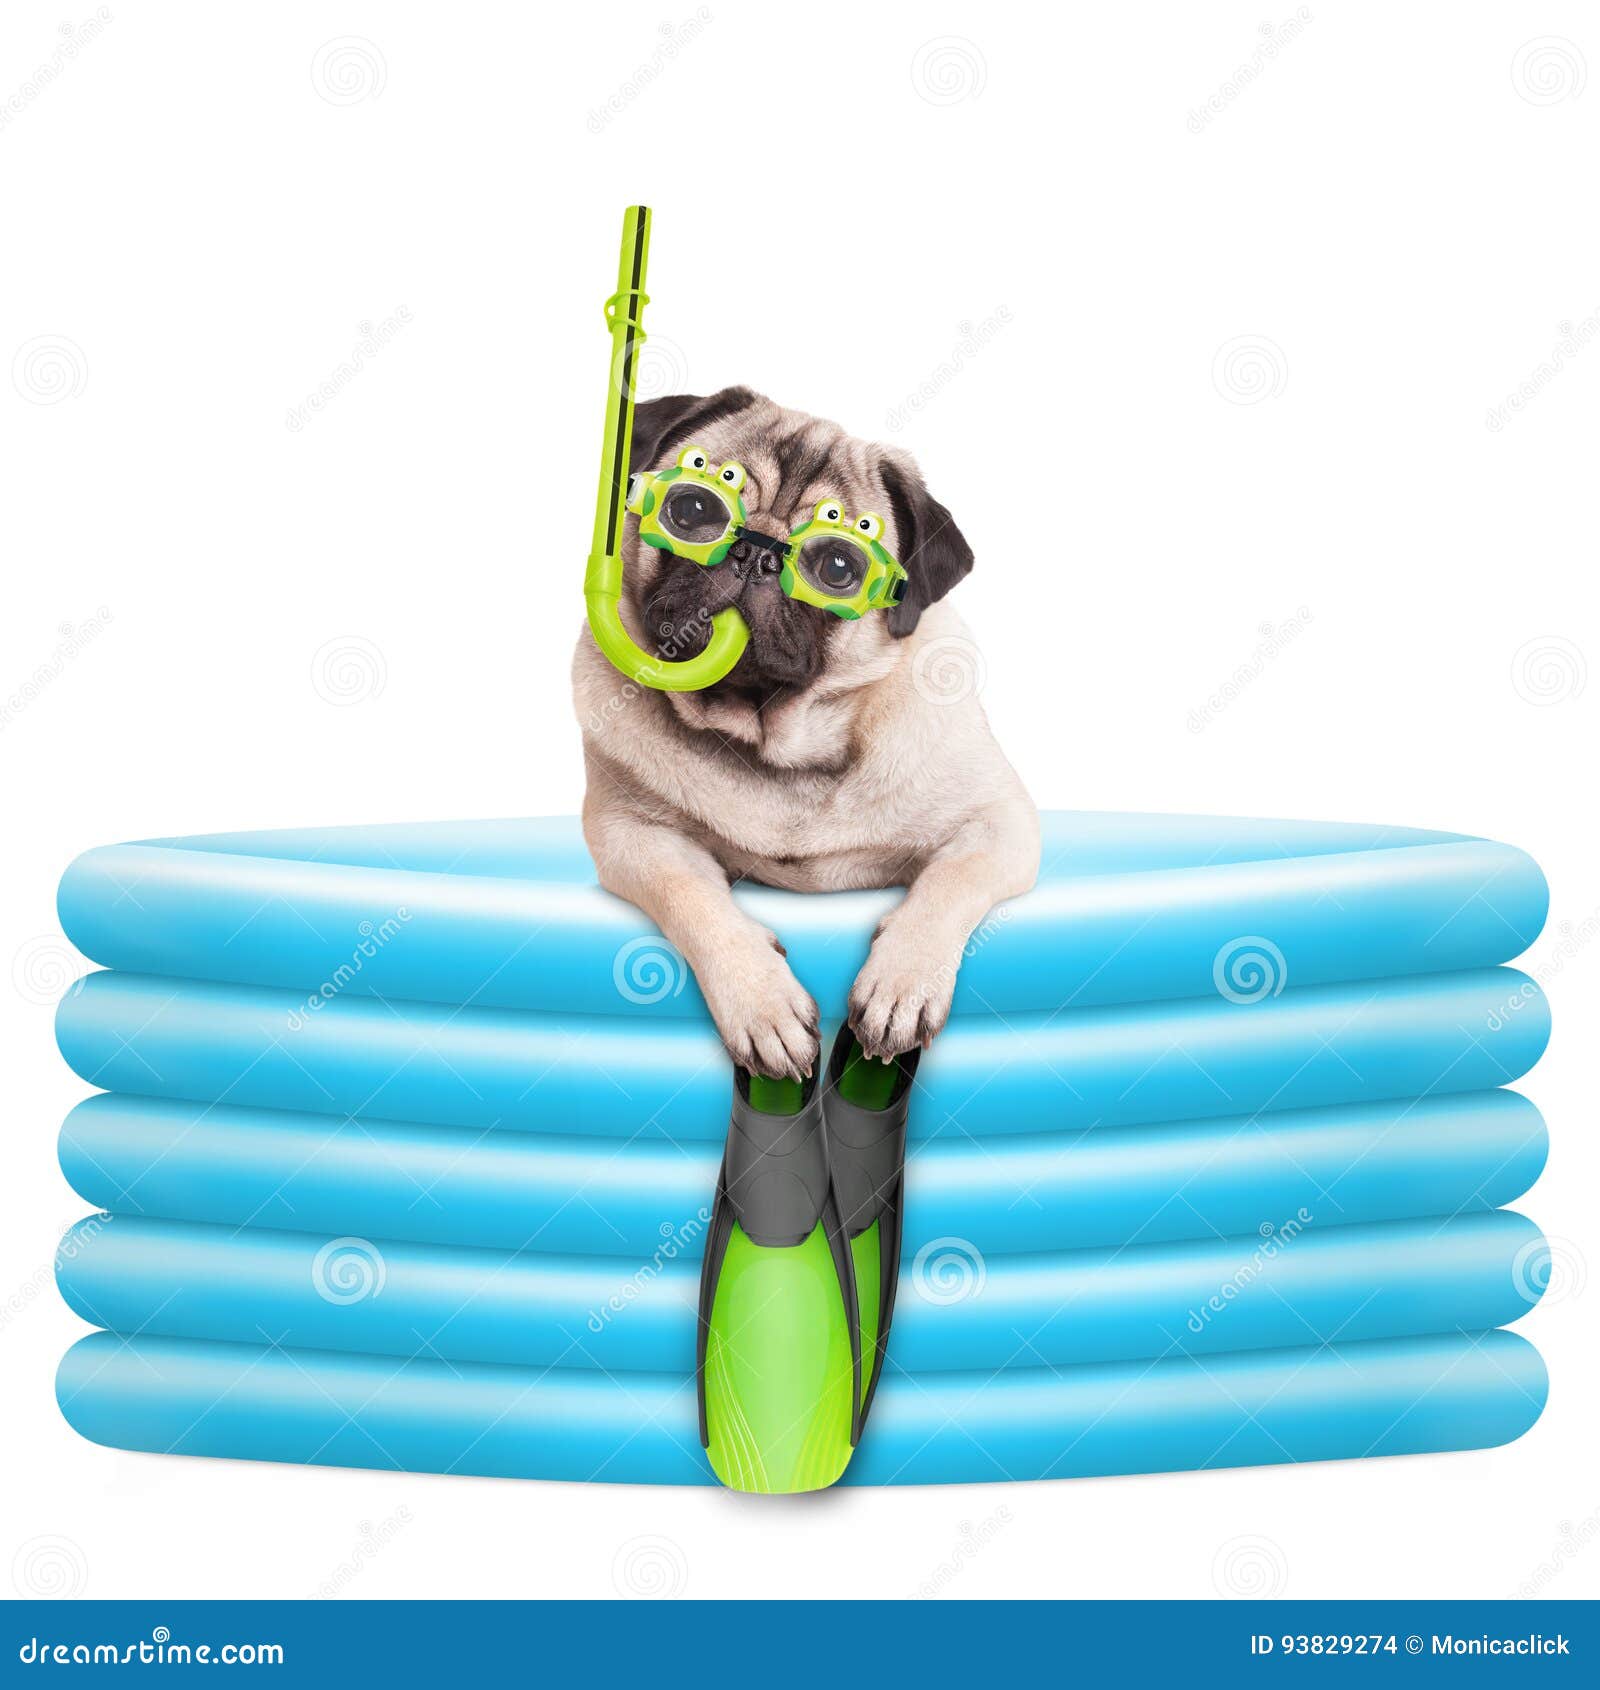 funny-summerly-pug-dog-goggles-snorkel-flippers-inflatable-pool-isolated-white-background-93829274.jpg